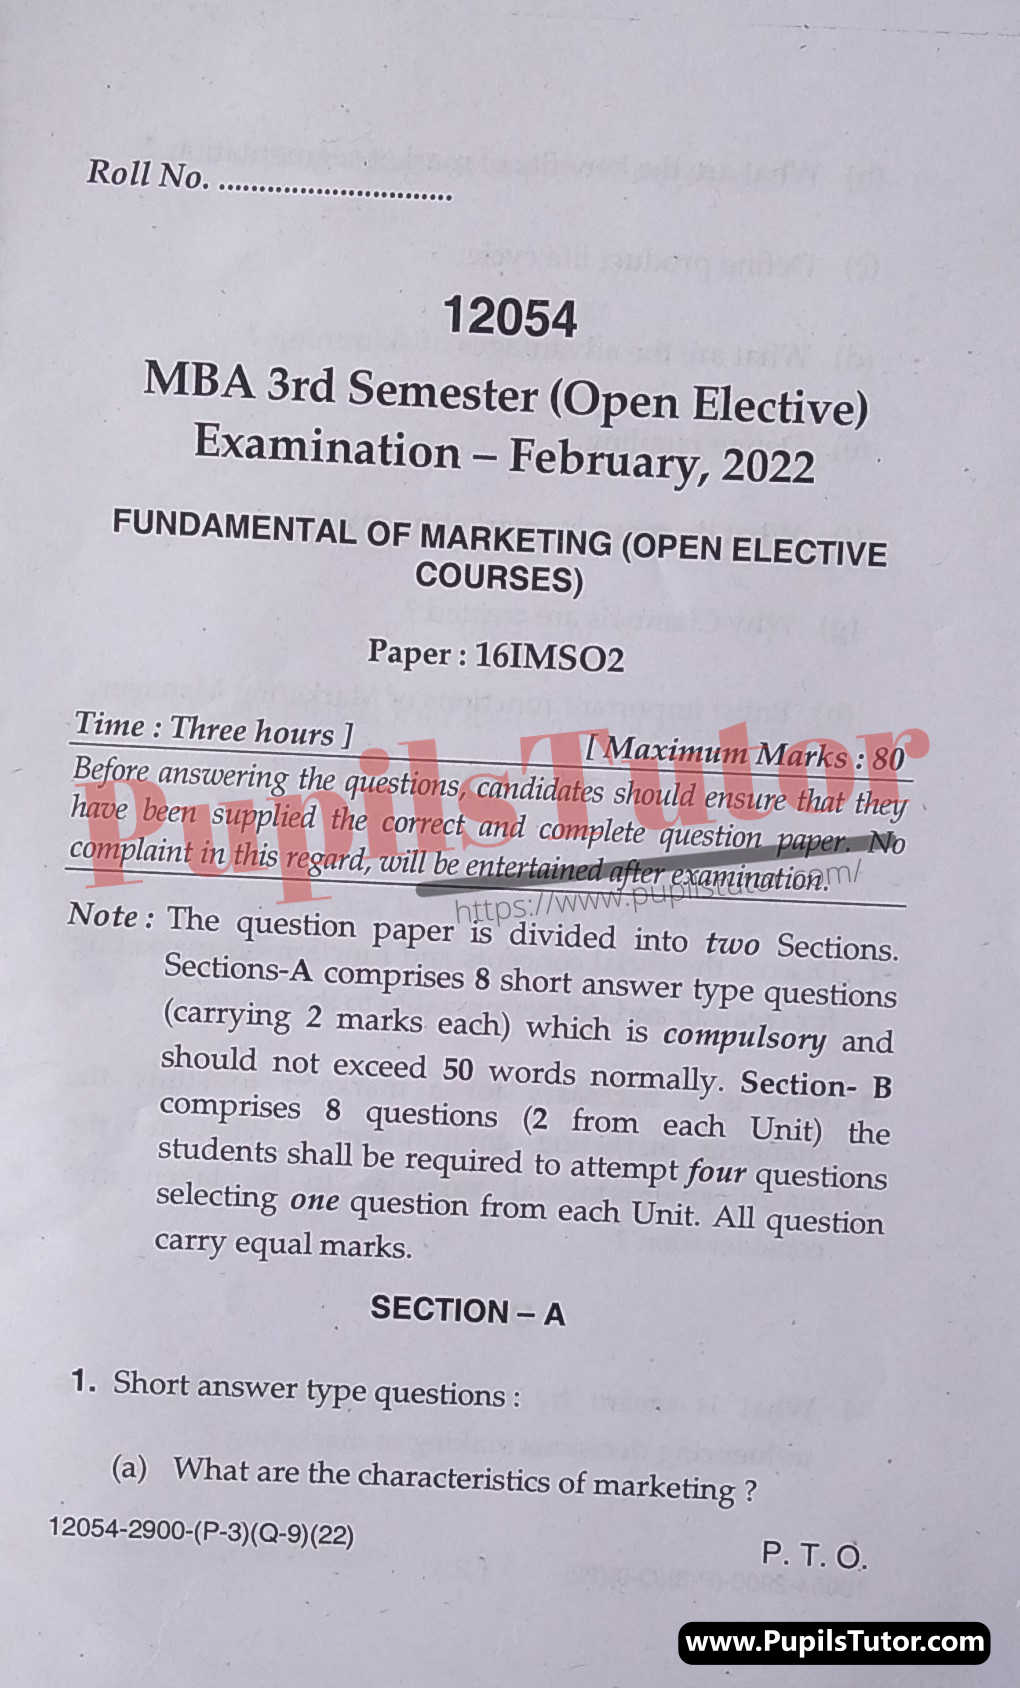 MDU (Maharshi Dayanand University, Rohtak Haryana) MBA Open Elective Third Semester Previous Year Fundamental Of Marketing Question Paper For February, 2022 Exam (Question Paper Page 1) - pupilstutor.com